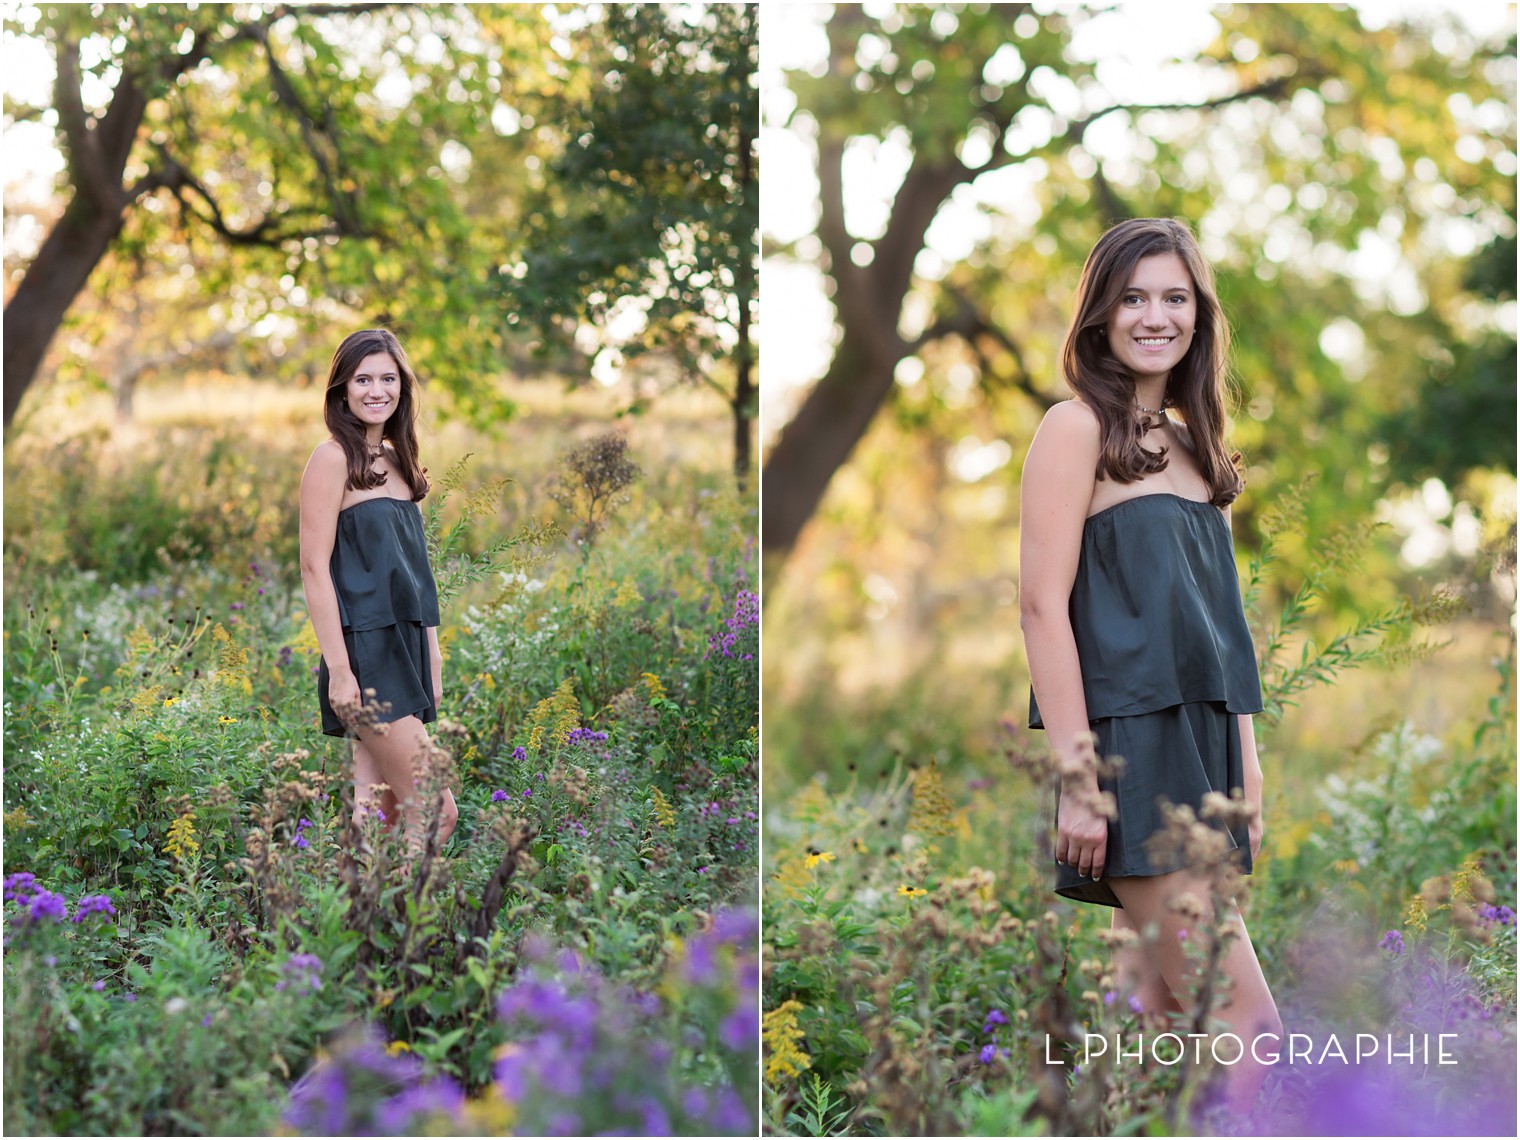 Erin,Forest Park,L Photographie senior portraits,L Photographie seniors,Meredith Marquardt,Meredith Weinhold,Rockwood School district,Rockwood Summit High School,Rockwood Summit senior,Saint Louis high school senior photographer,Saint Louis high school senior photography,Tower Grove Park,class of 2018,fall senior pictures,golden hour,high school senior pictures,midwest photographer,model,natural light,senior,senior photos,senior pictures in the park,senior session,sunset,